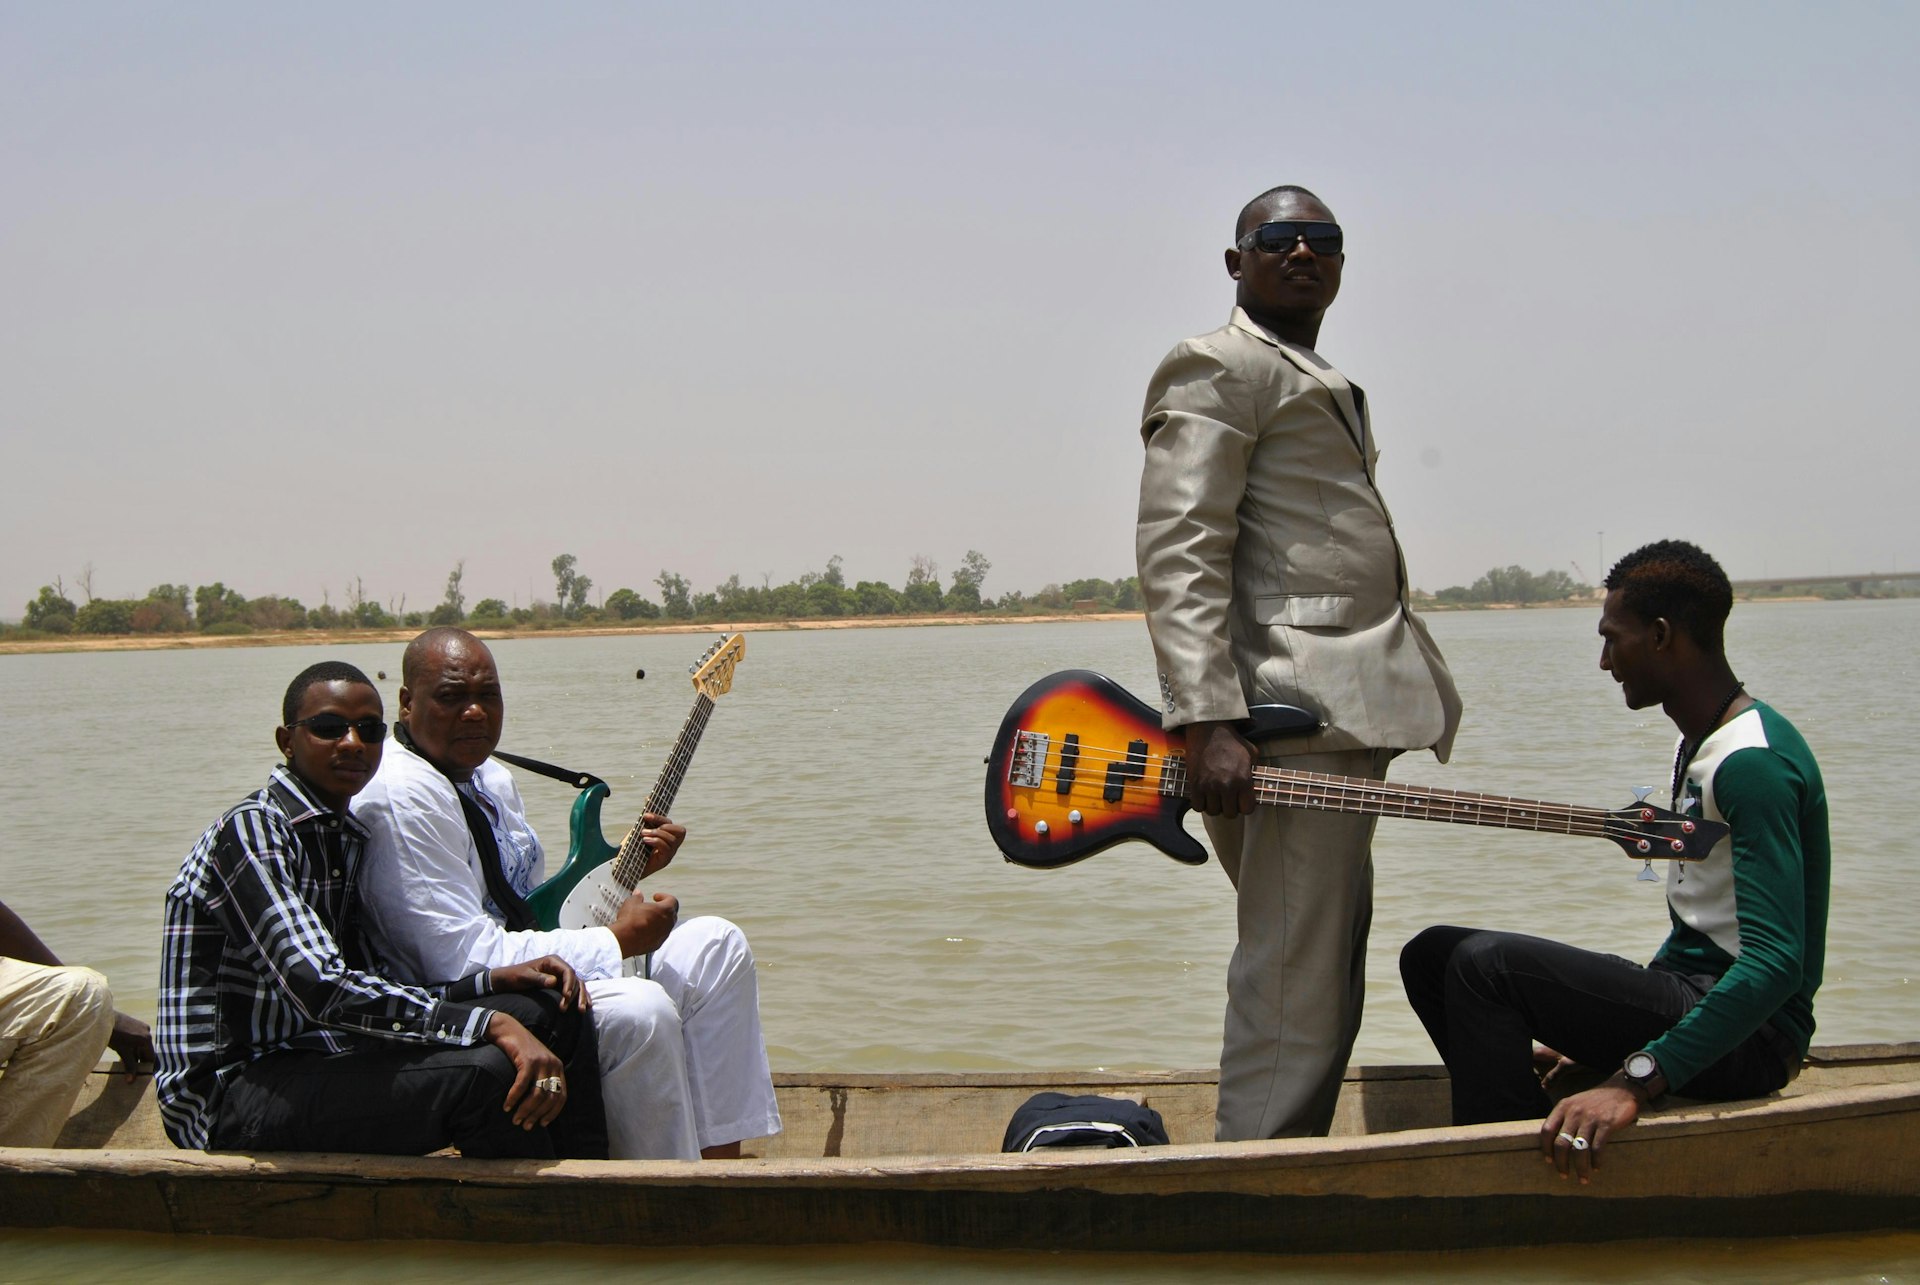 Niger’s Tal National are masters of the music grind